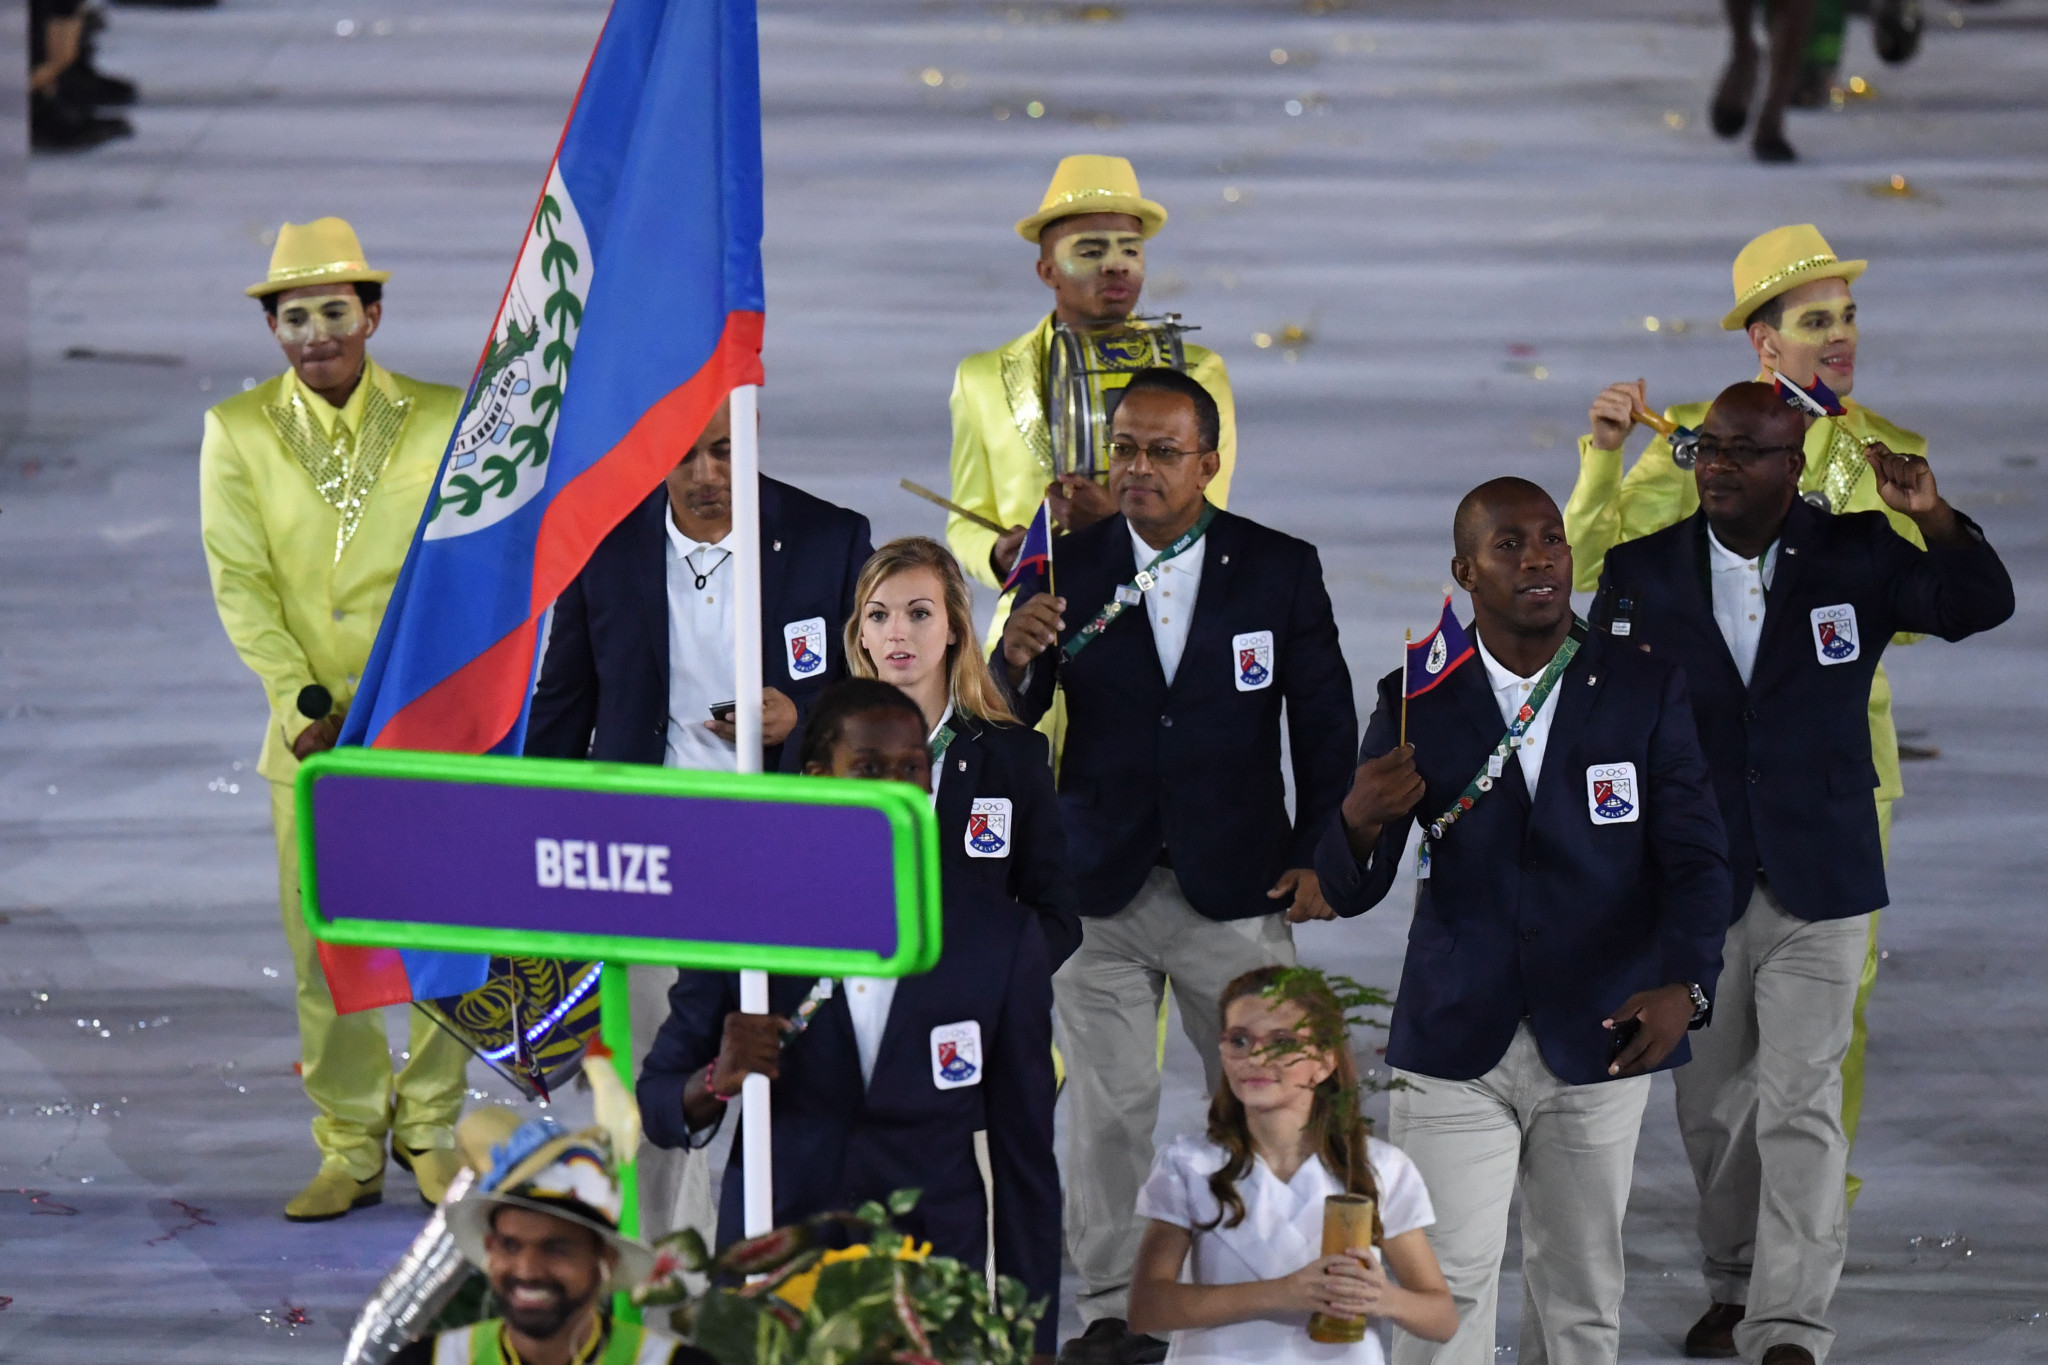 Belize sent a team to the Rio 2016 Olympic Games ©Getty Images